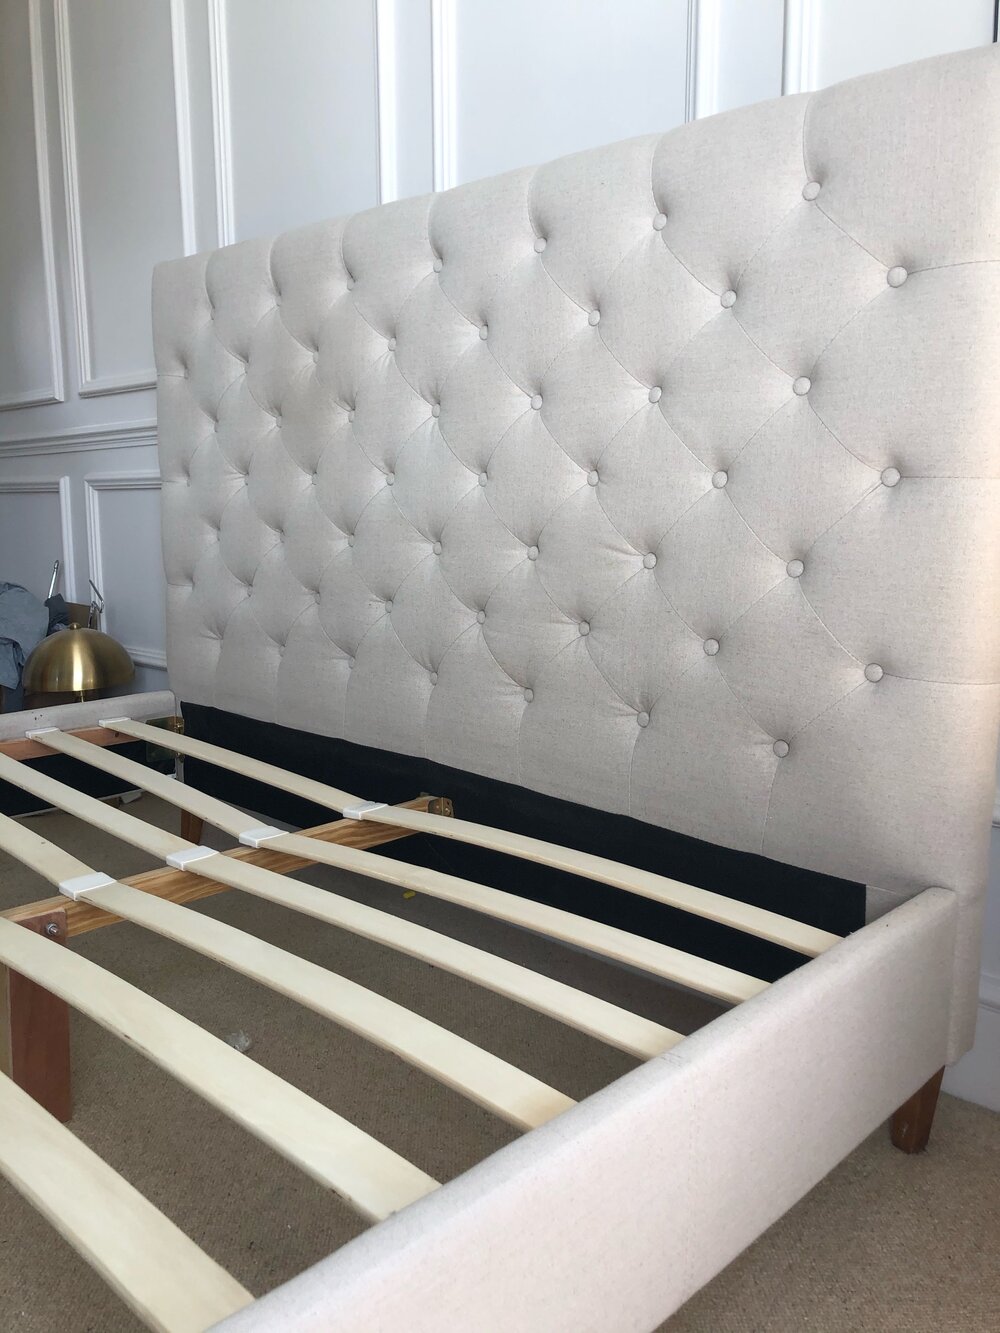 How To Reupholster A Bed The Diy That, Can You Reupholster A Headboard